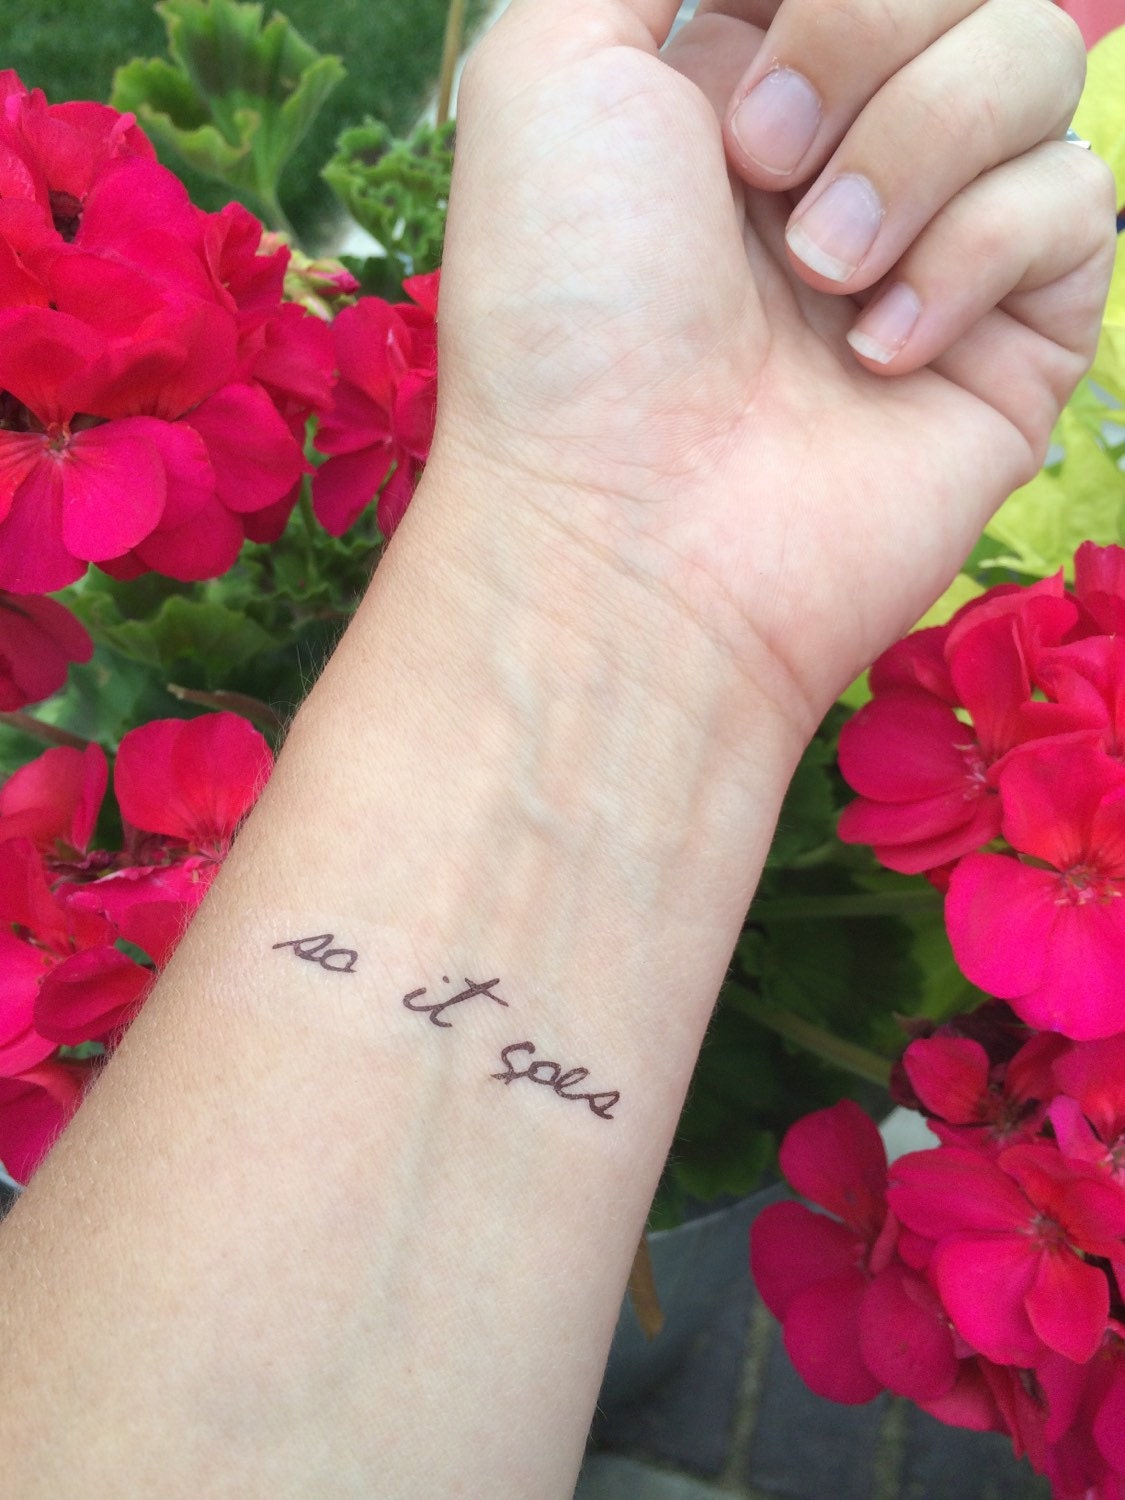 The 7 best temporary tattoos that are worth a try - The Manual